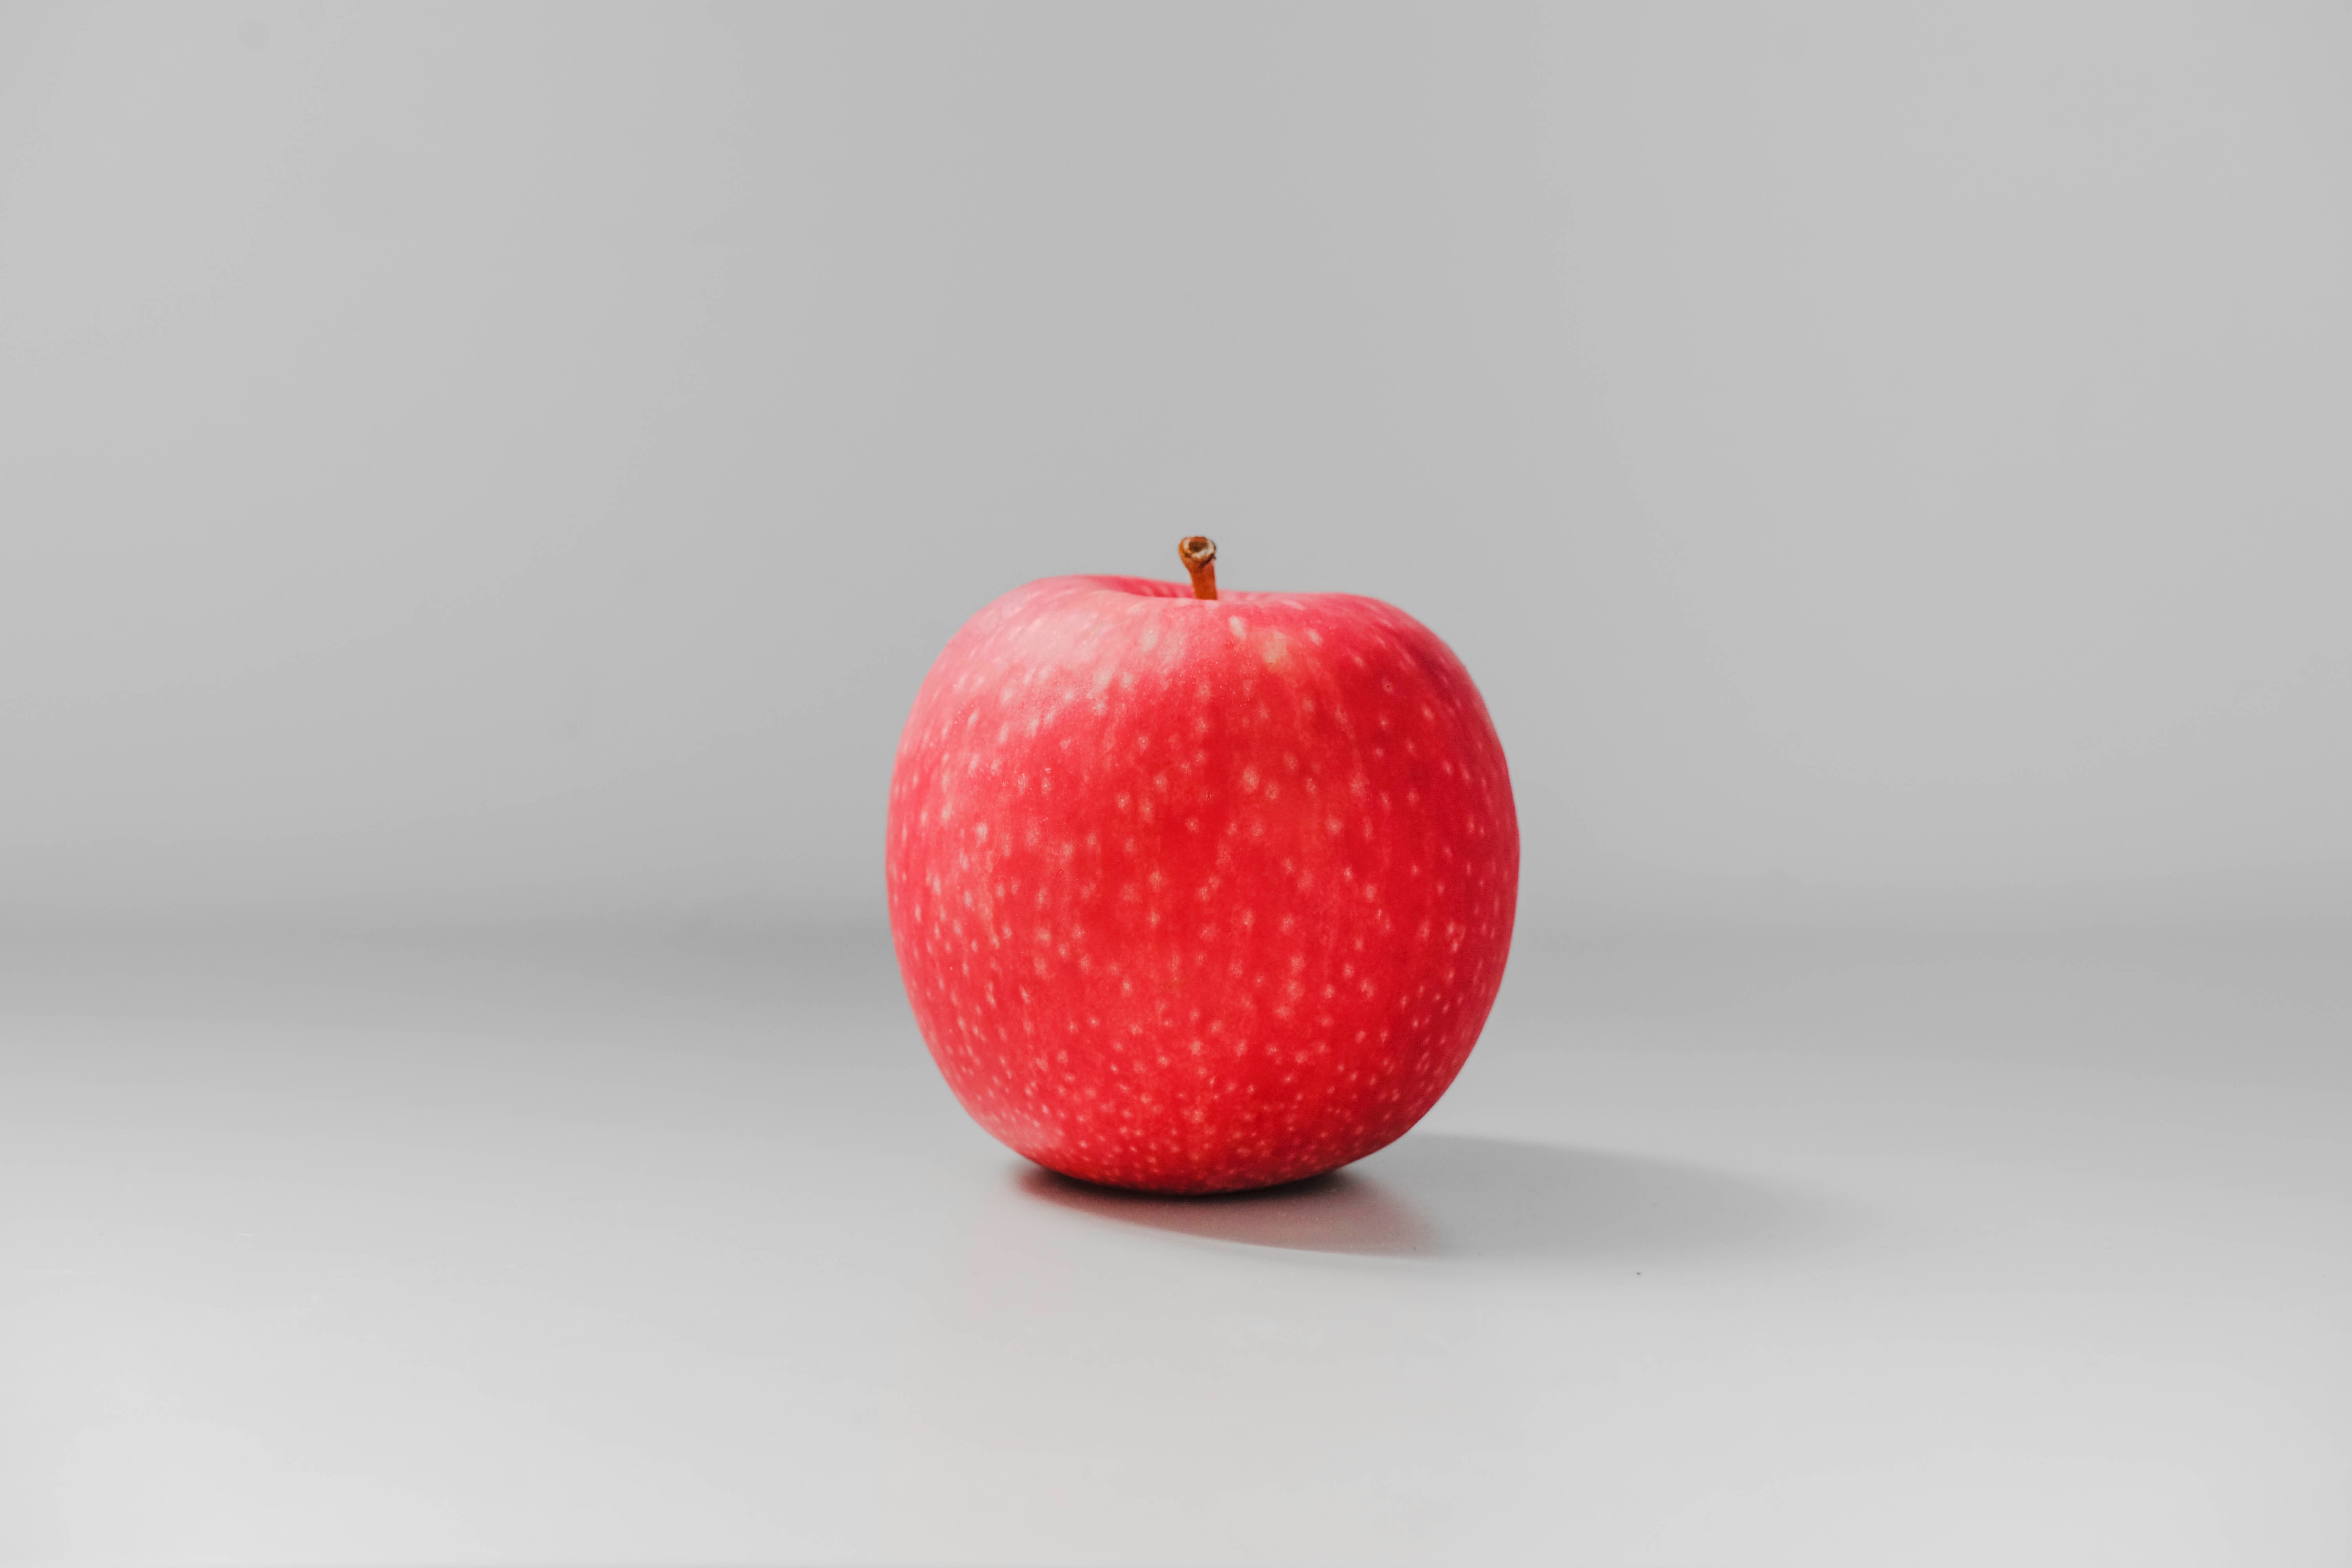 This apple just is red